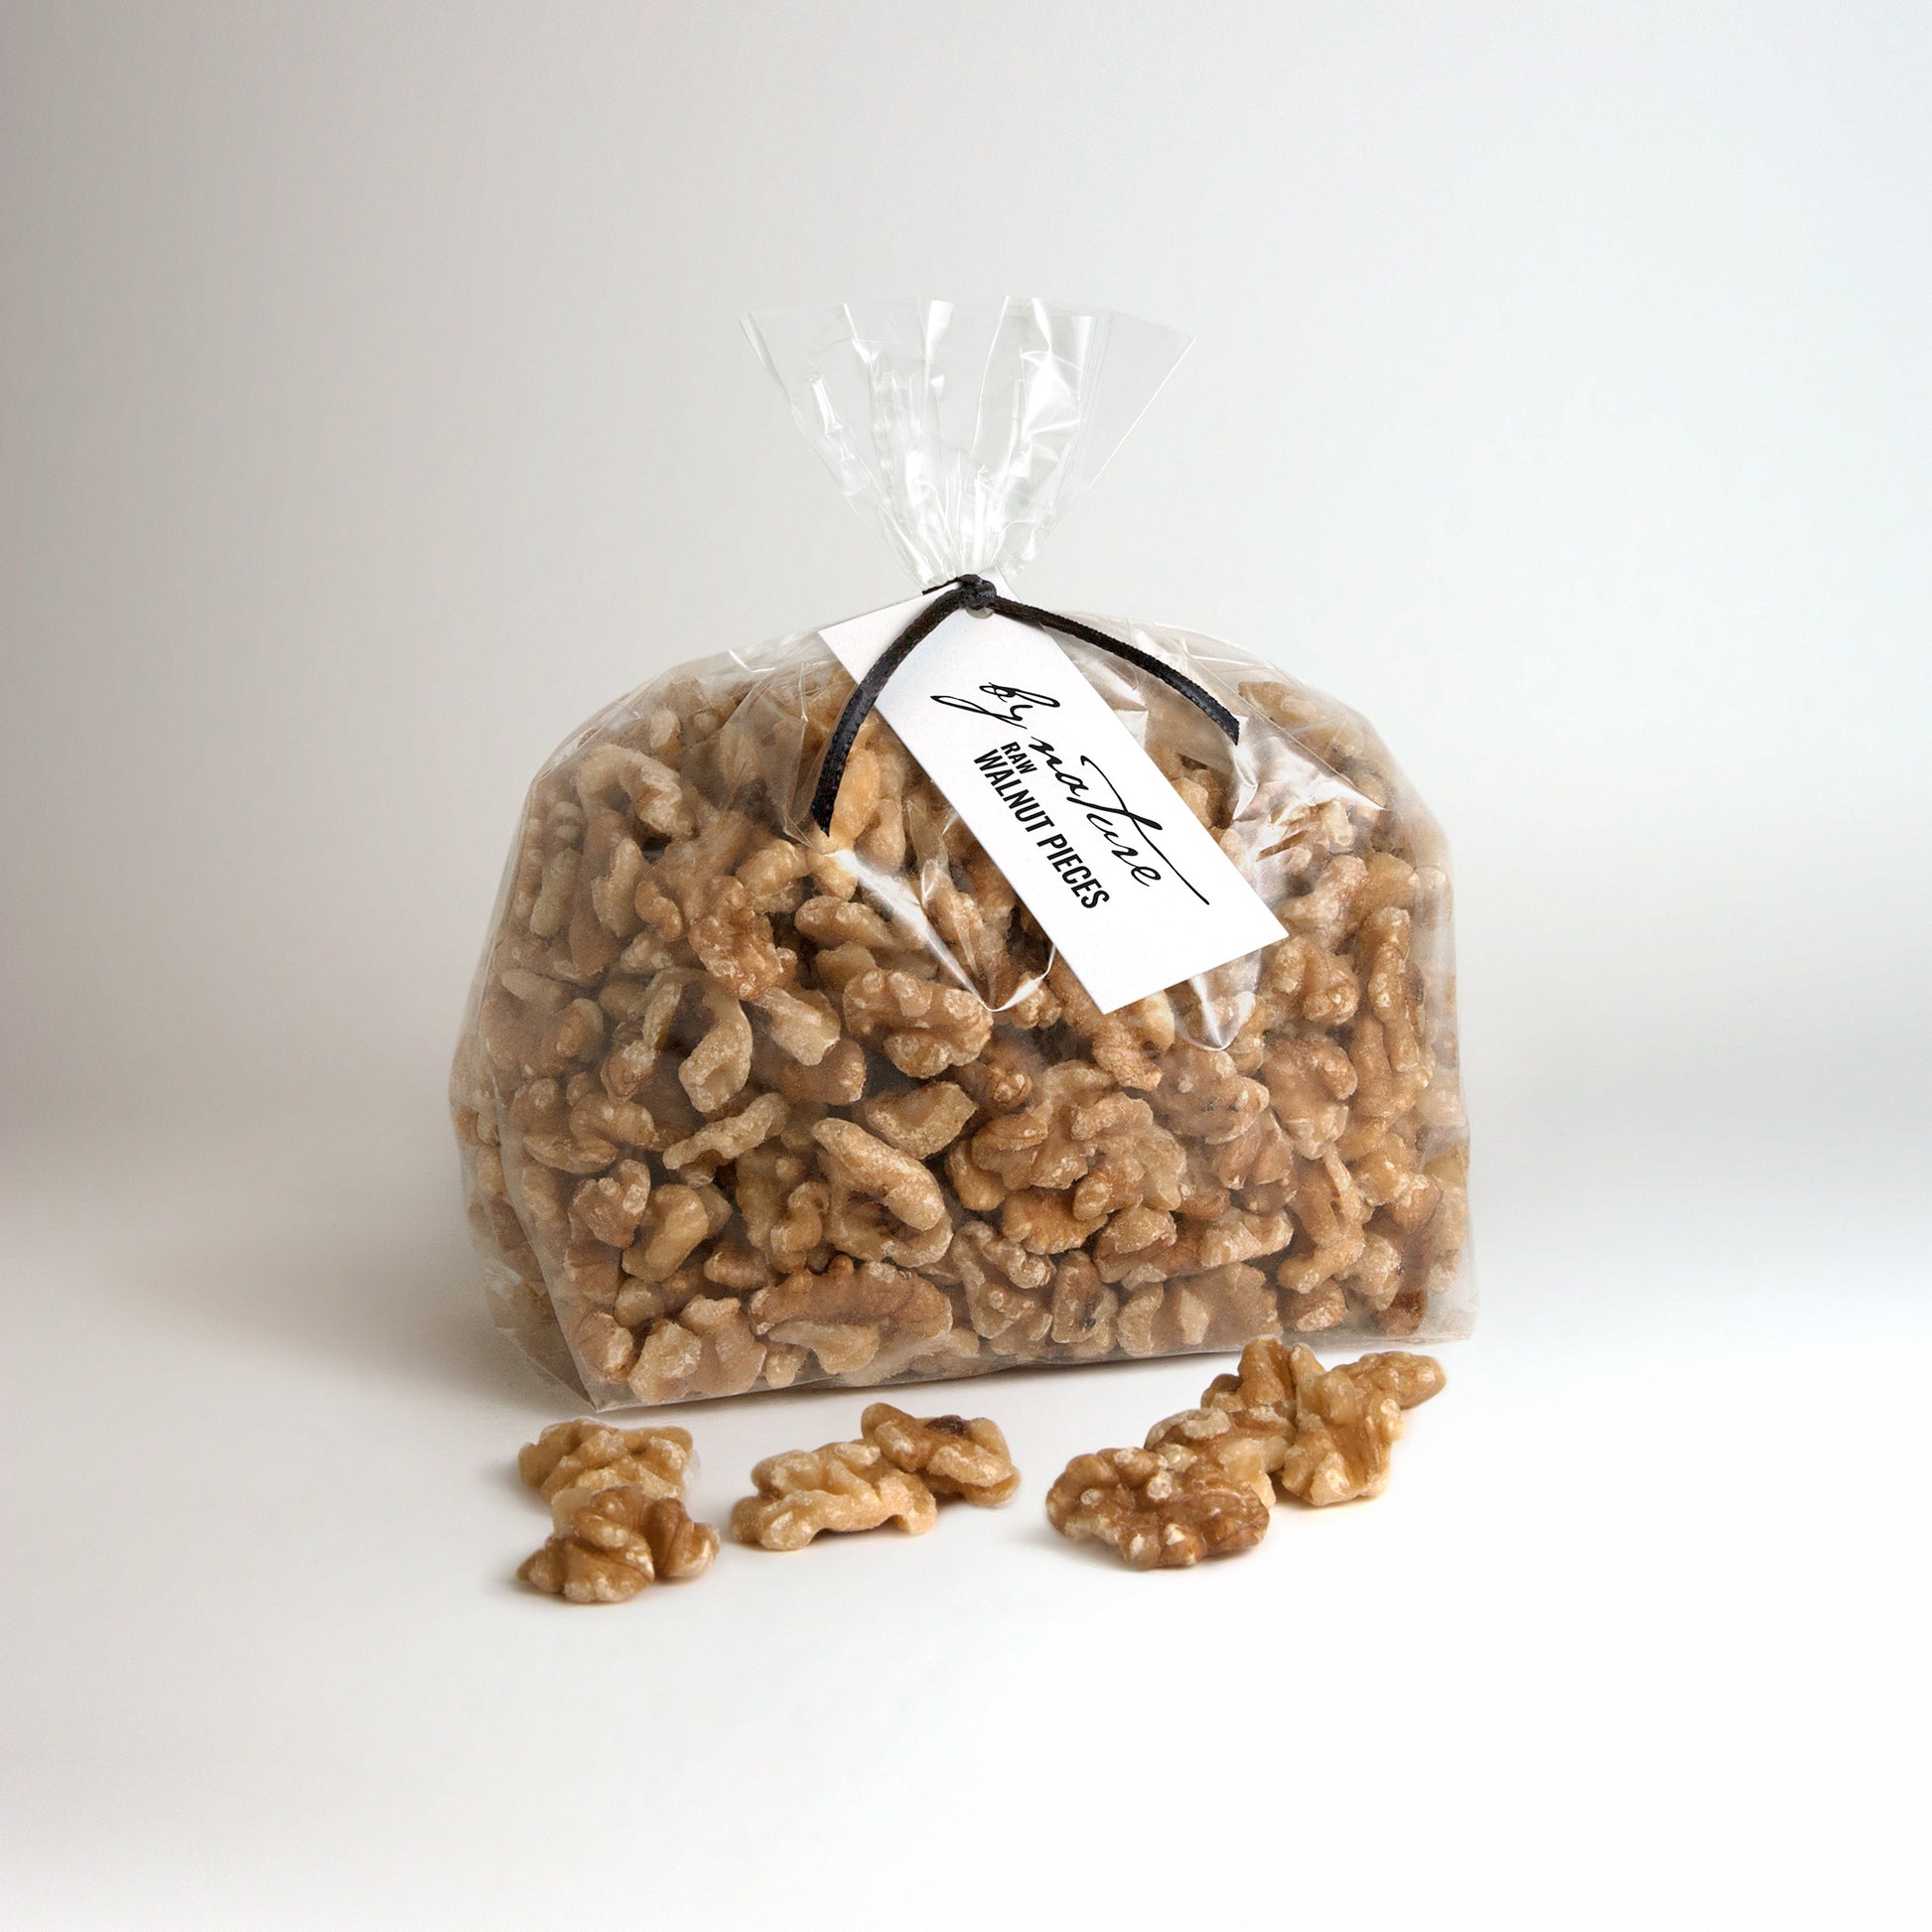 BY NATURE Walnut Pieces, 500g - raw.